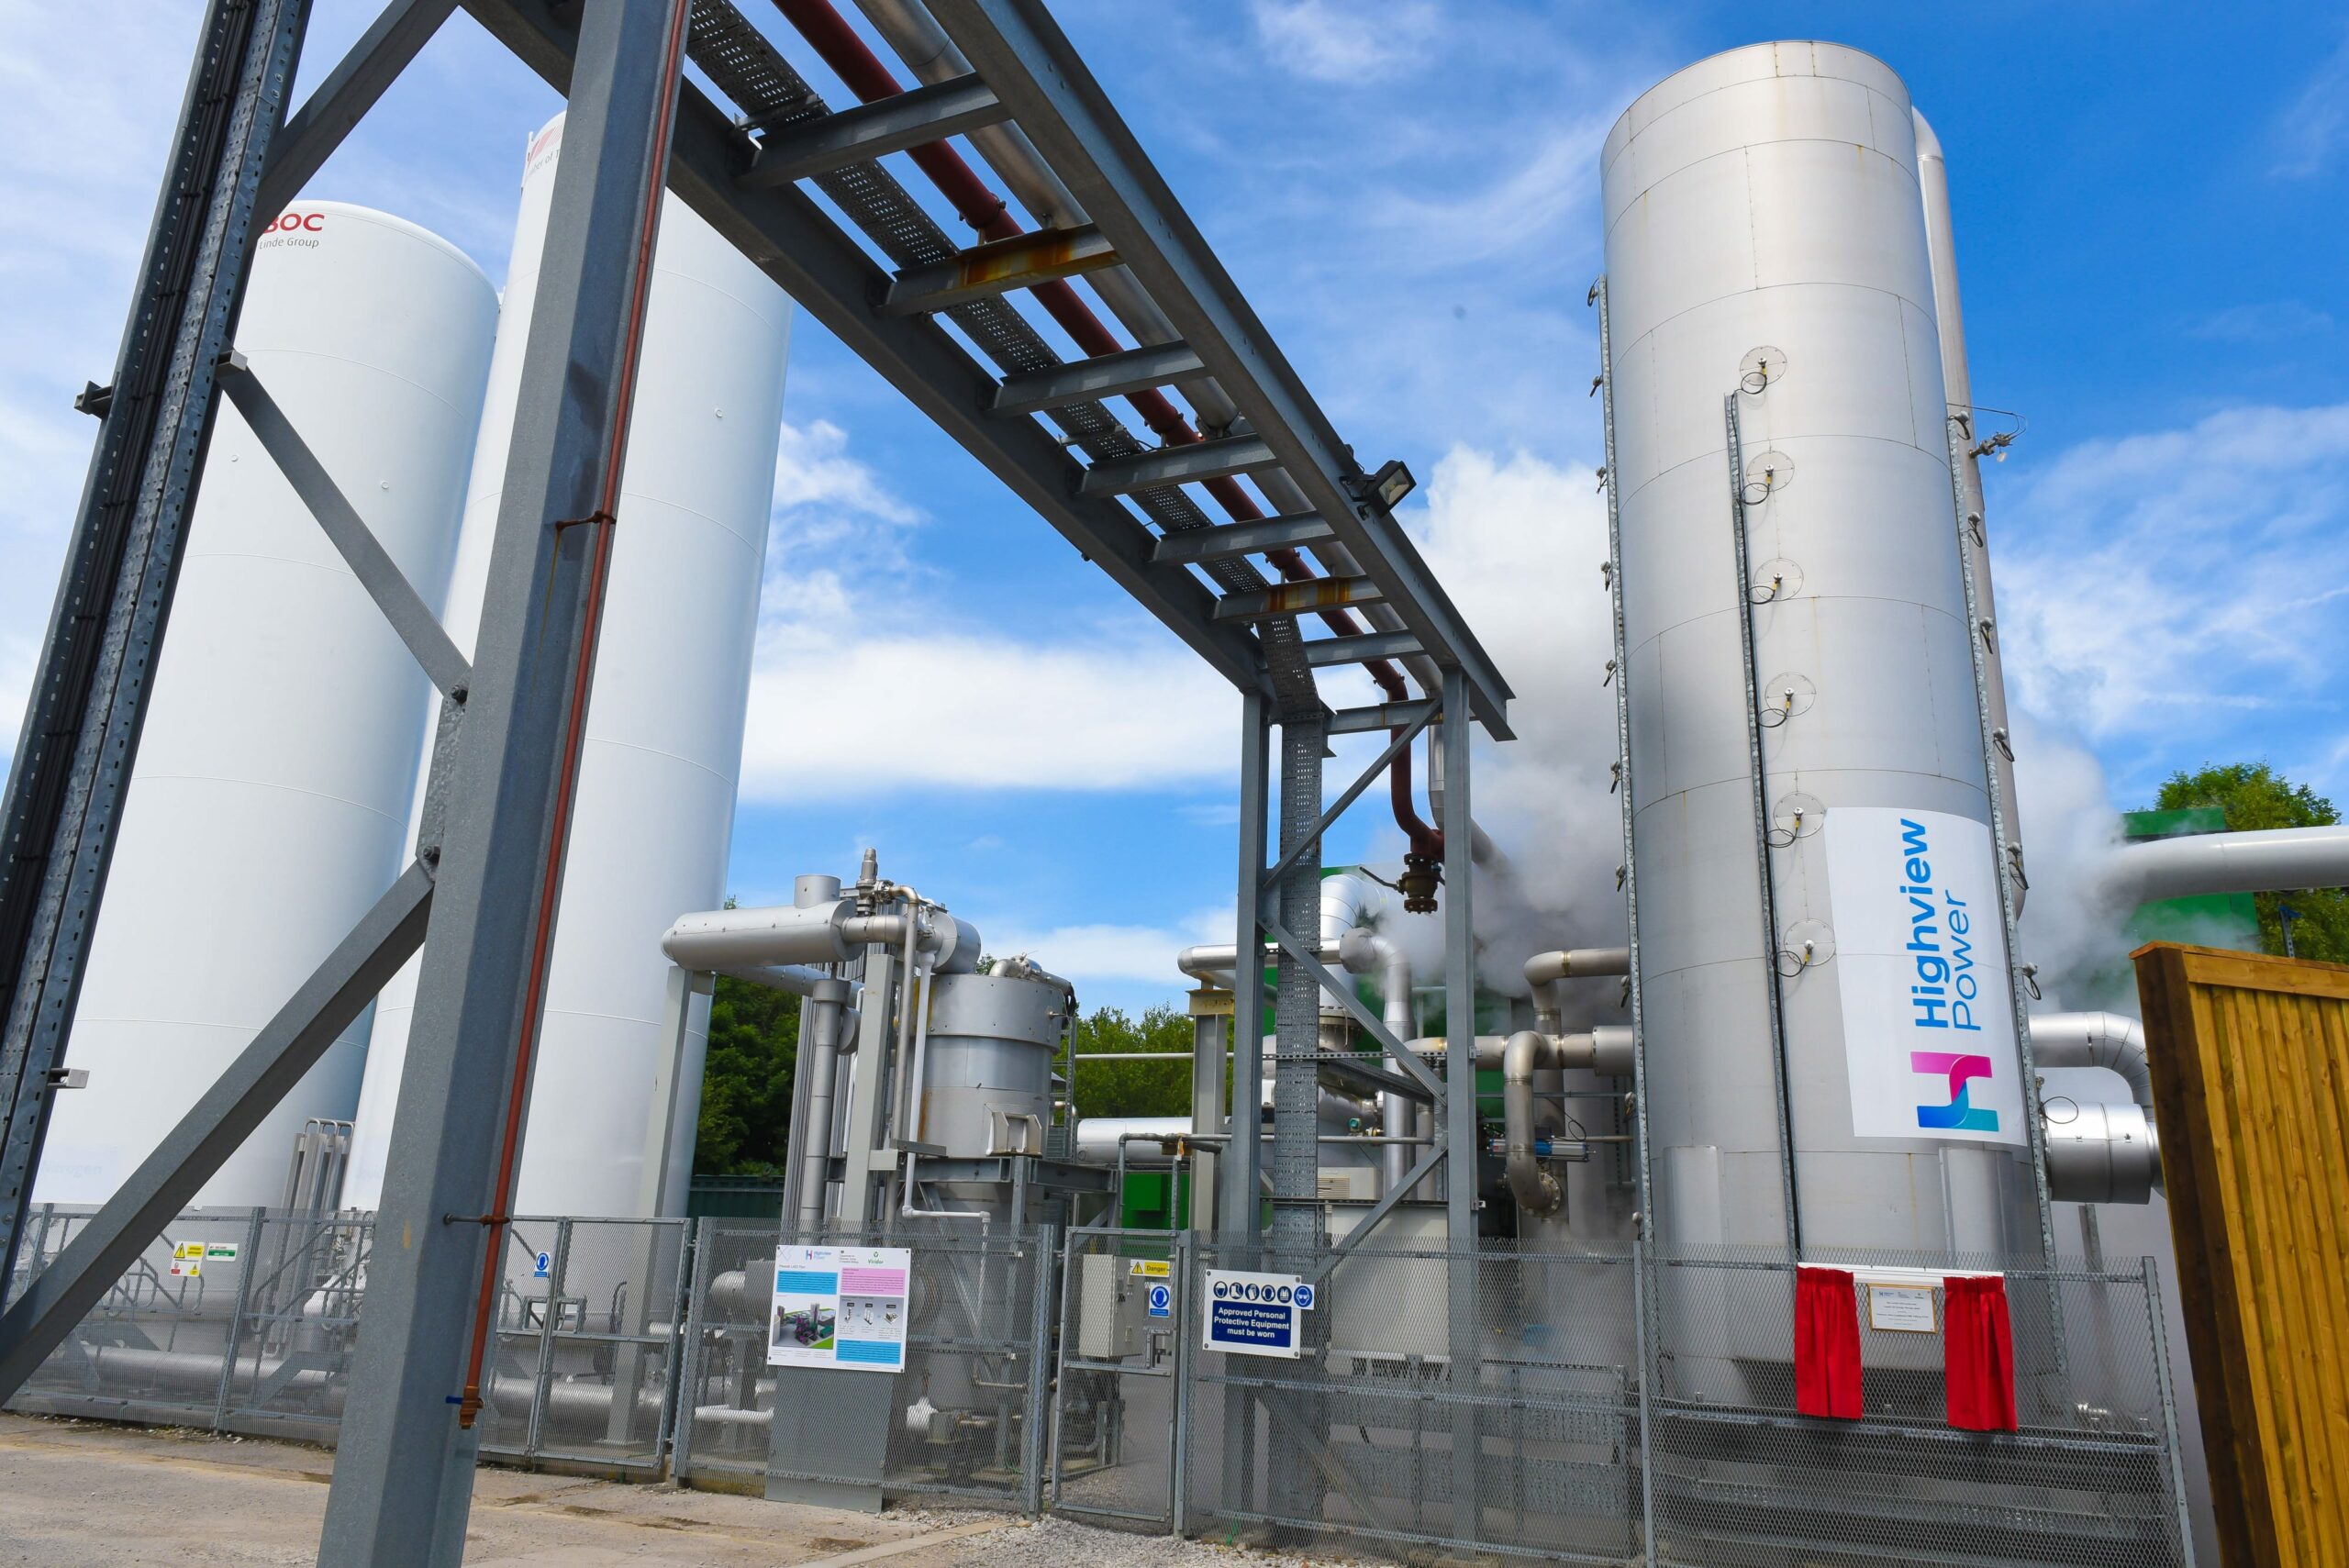 Intriguing “frozen air” energy storage in Vermont gets canned